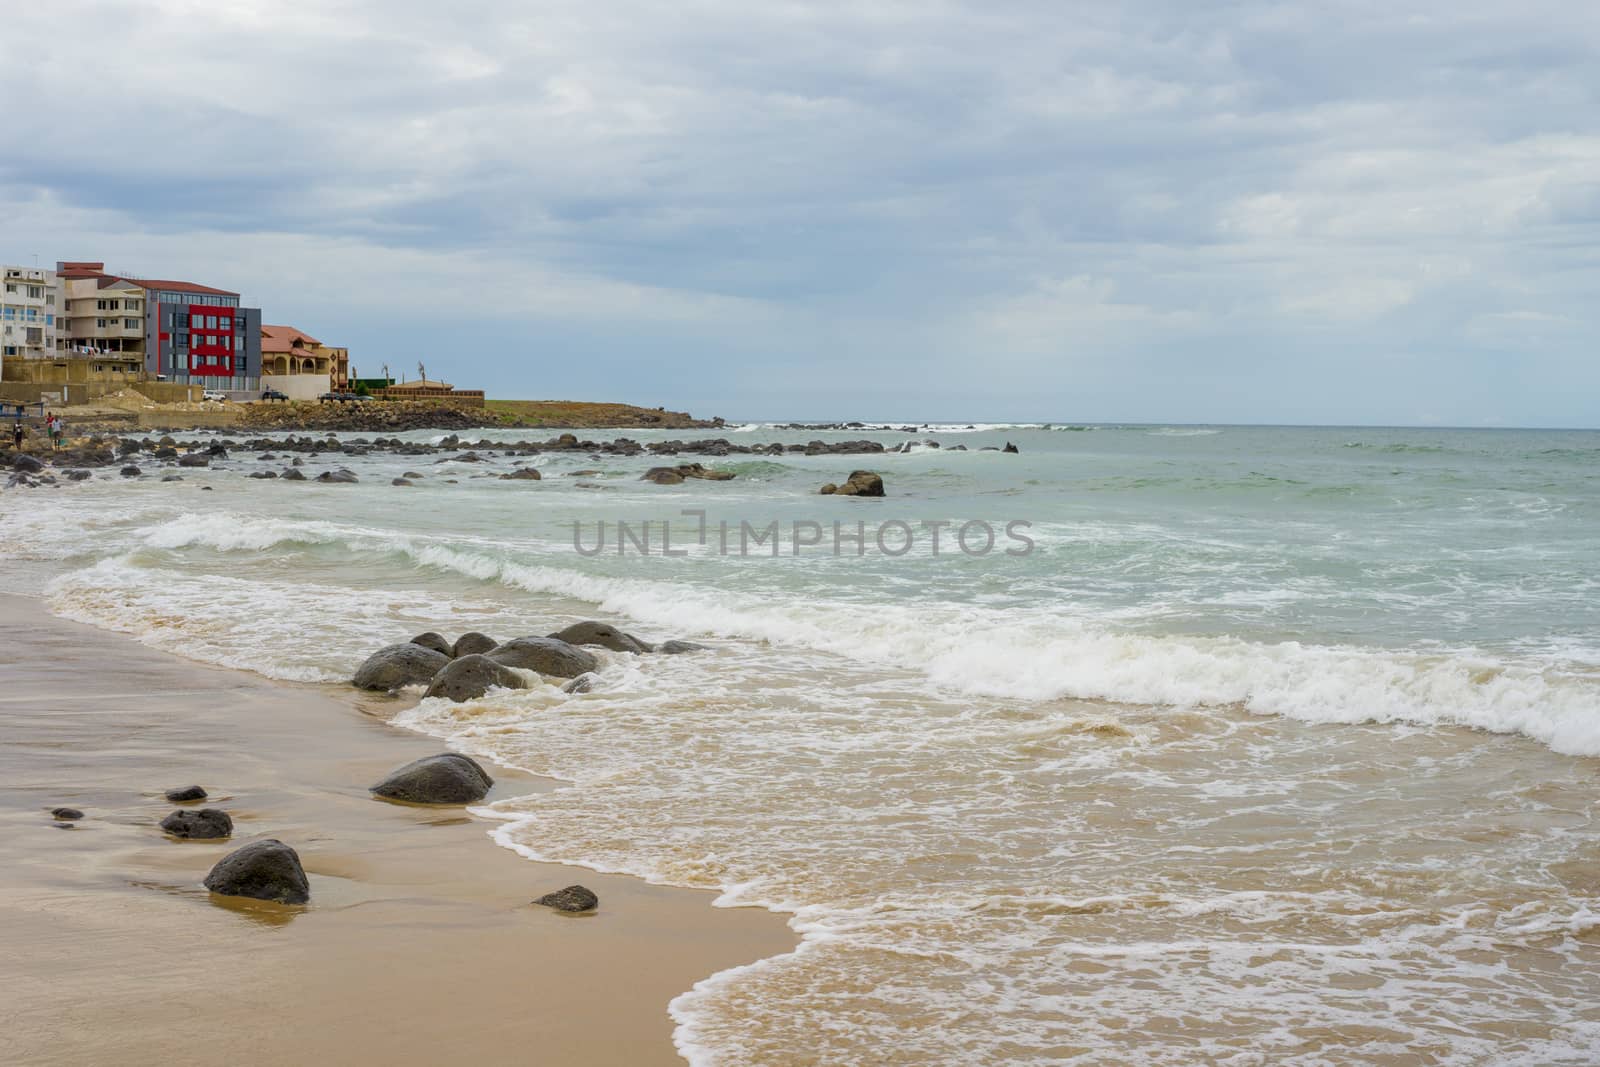 The beautiful waters of the Atlantic ocean with its rocky coastline near the City of Dakar in Senegal